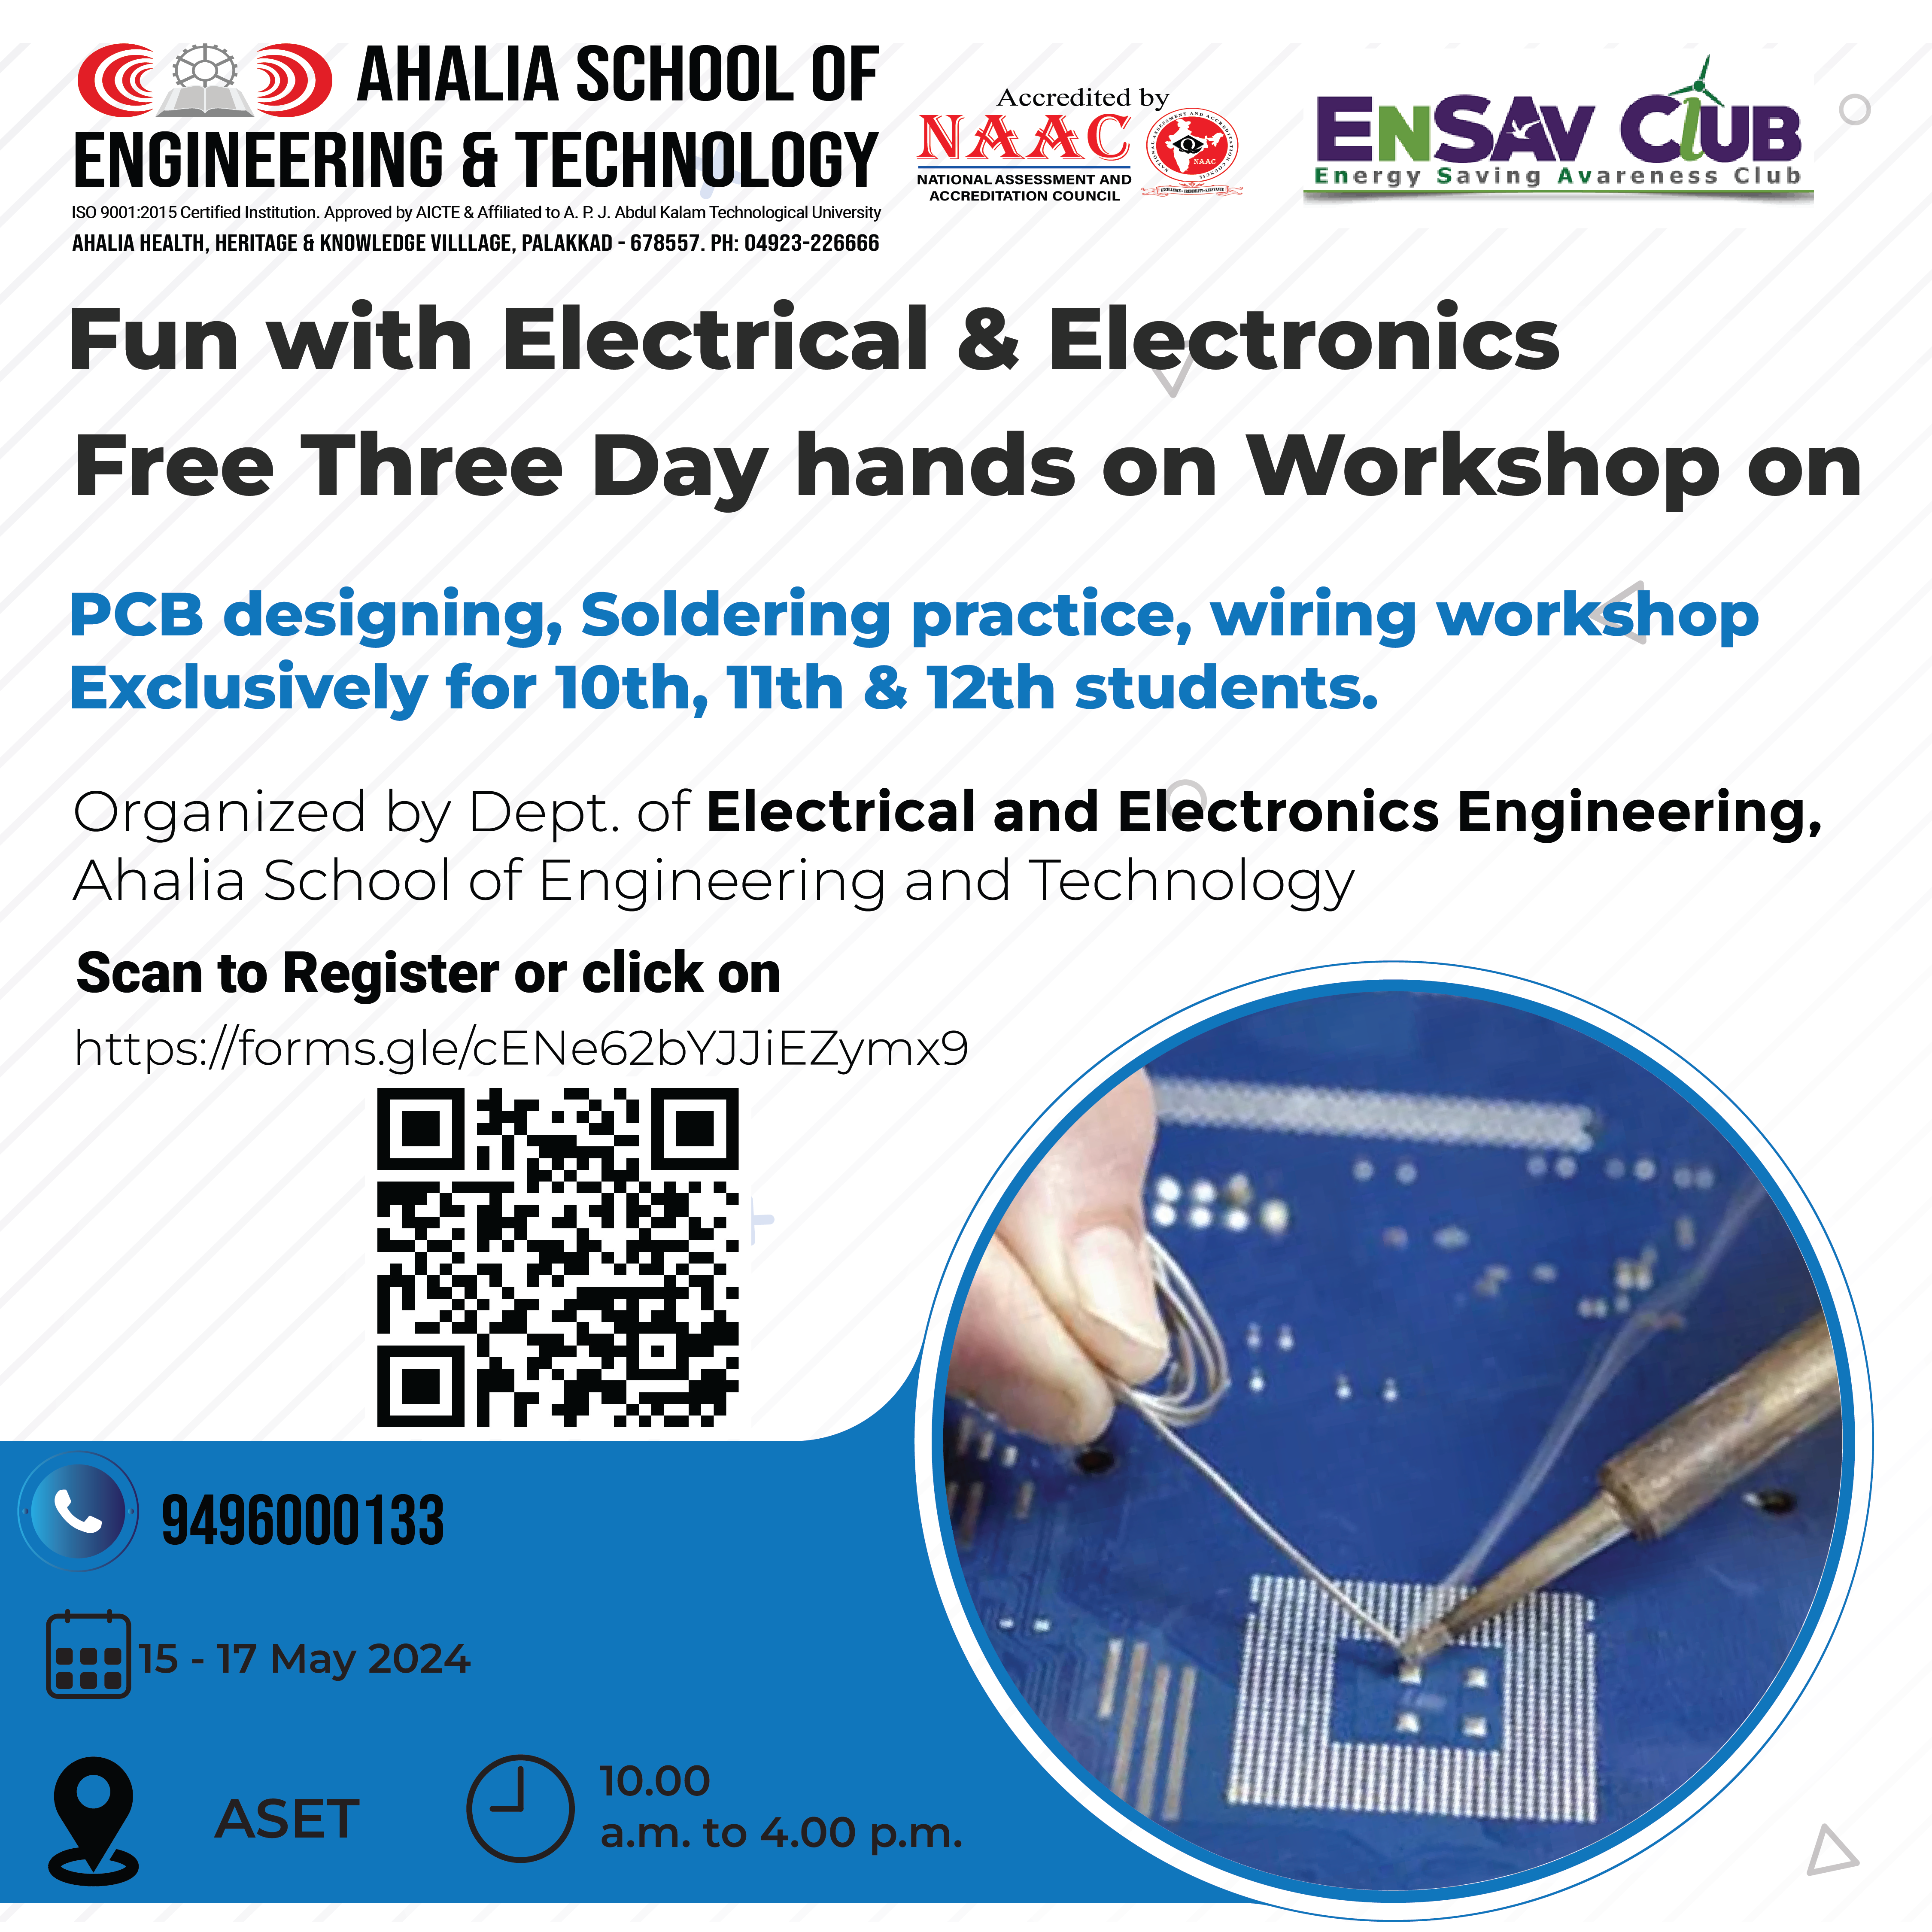 Three Day Hands On Workshop On “Fun With Electrical & Electronics “